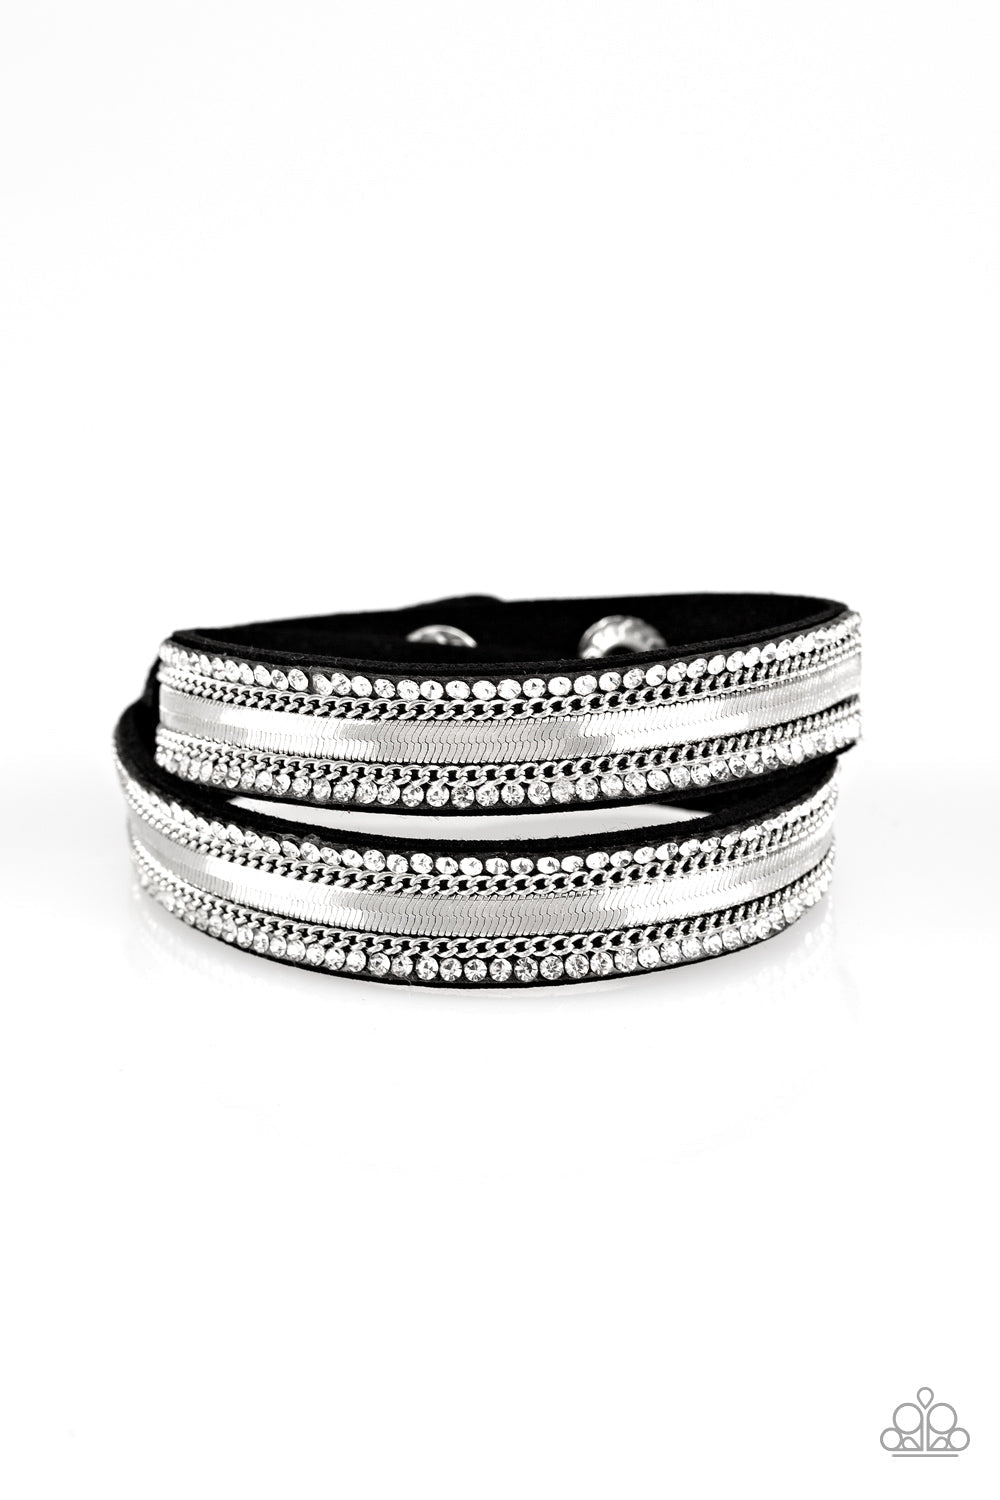 Rocker Rivalry - Black and Silver - Suede Wrap Bracelet - Paparazzi Accessories - Rows of classic silver chain, flat silver chain, and dainty white rhinestones are encrusted along a black suede band for a sassy look. The elongated band allows for a trendy double wrap design. Features an adjustable snap closure. Sold as one individual bracelet.